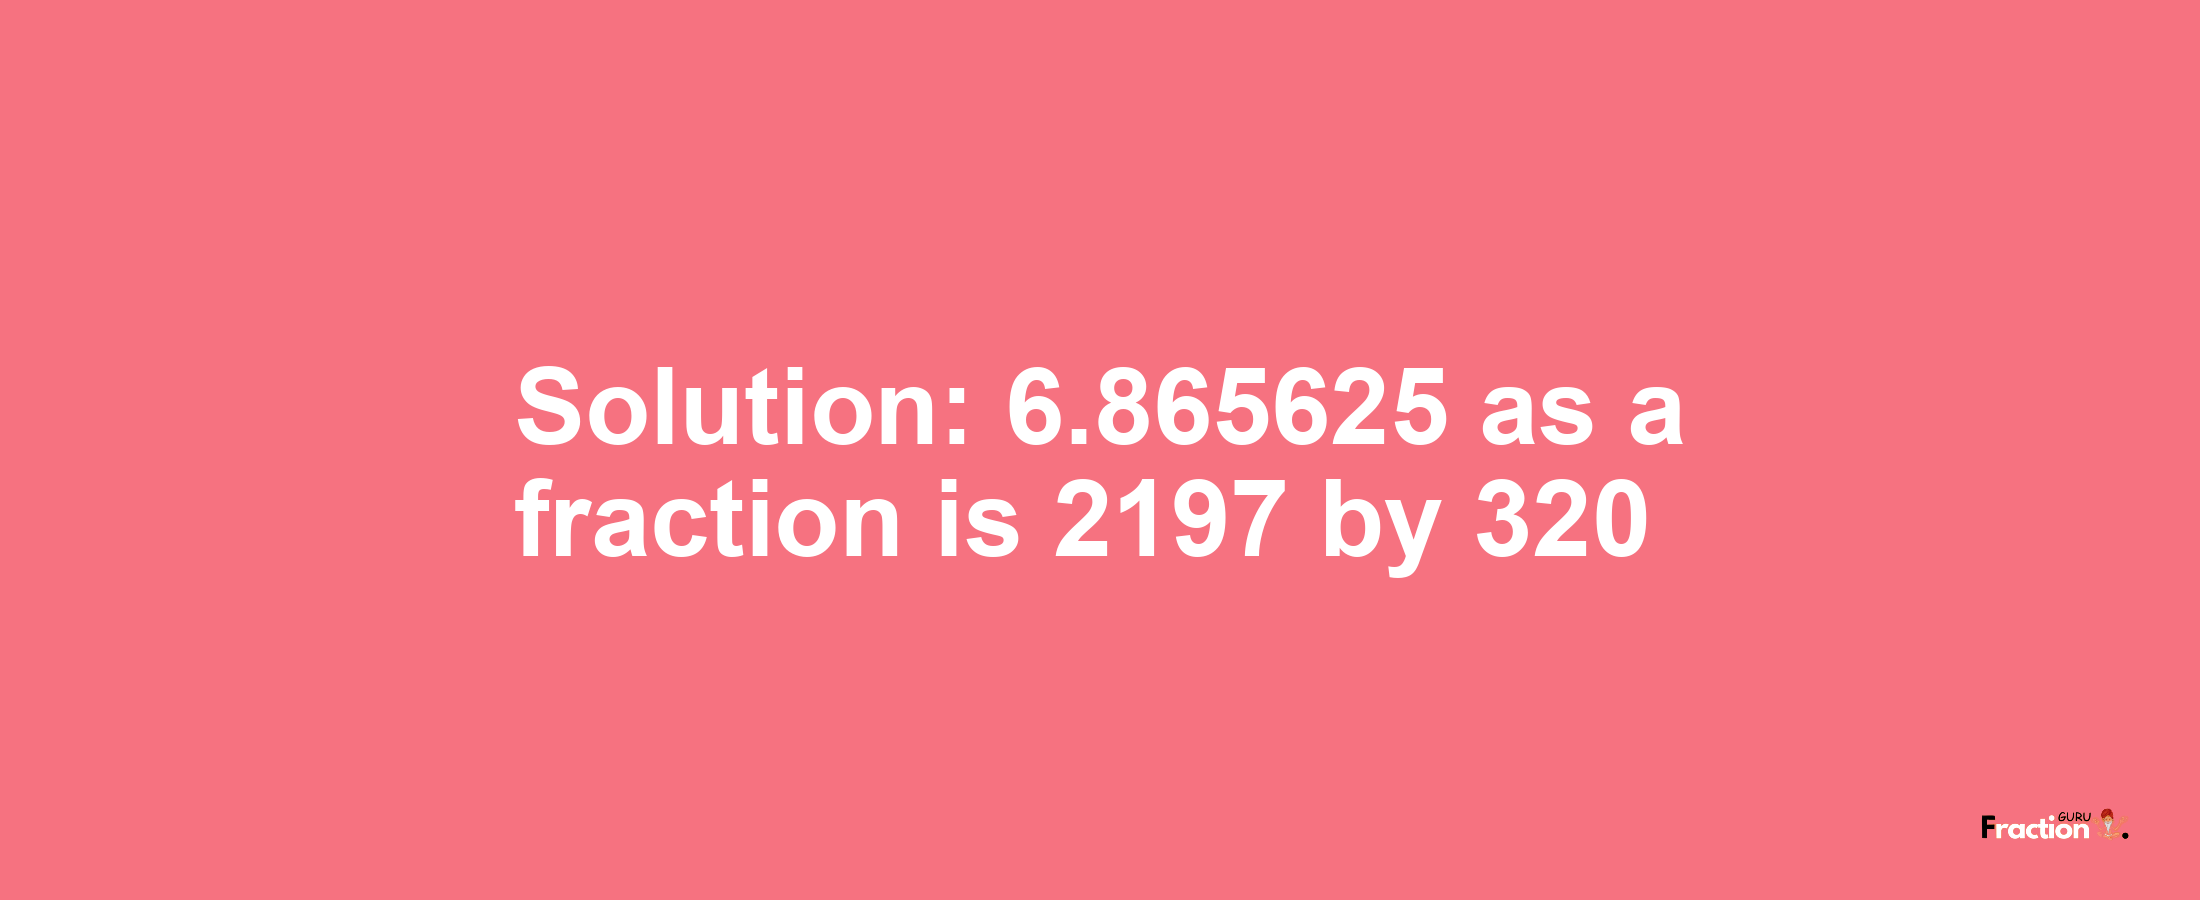 Solution:6.865625 as a fraction is 2197/320